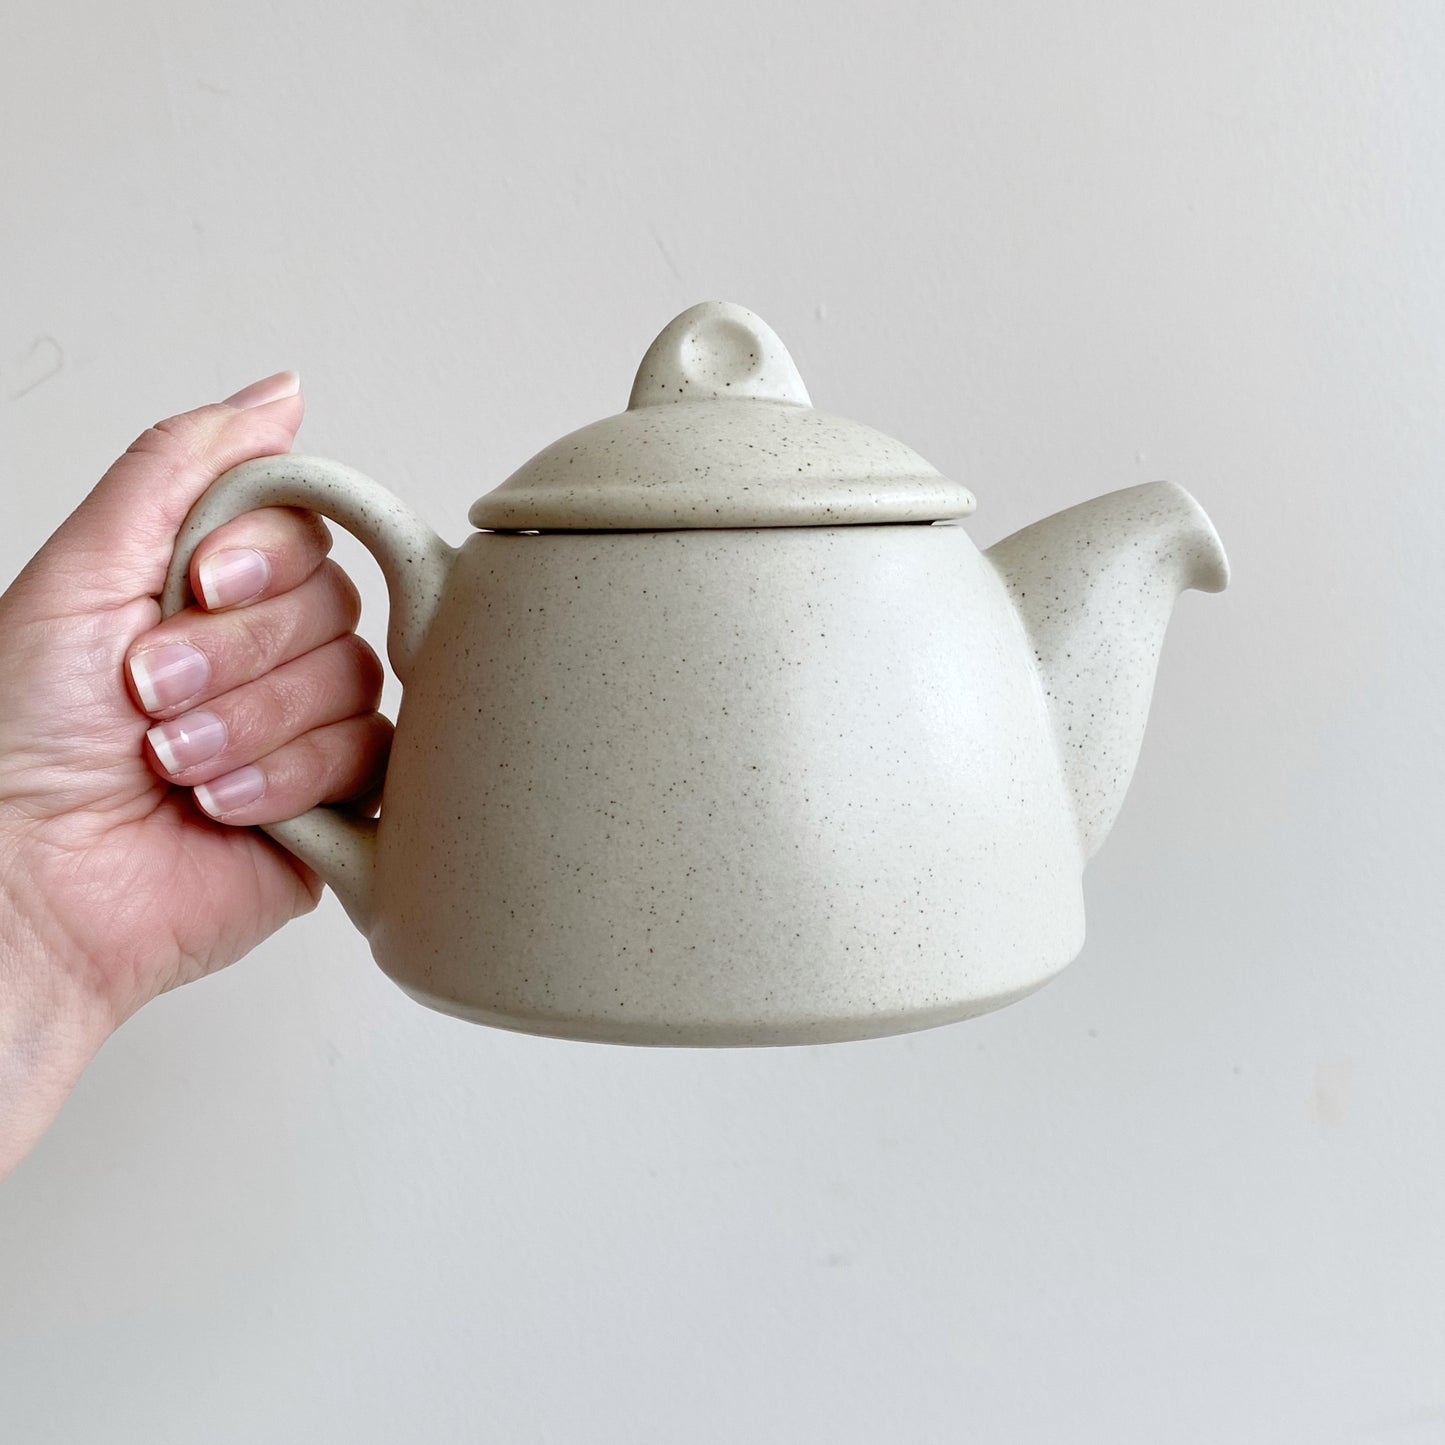 Found Ceramic Teapot by FORLIFE